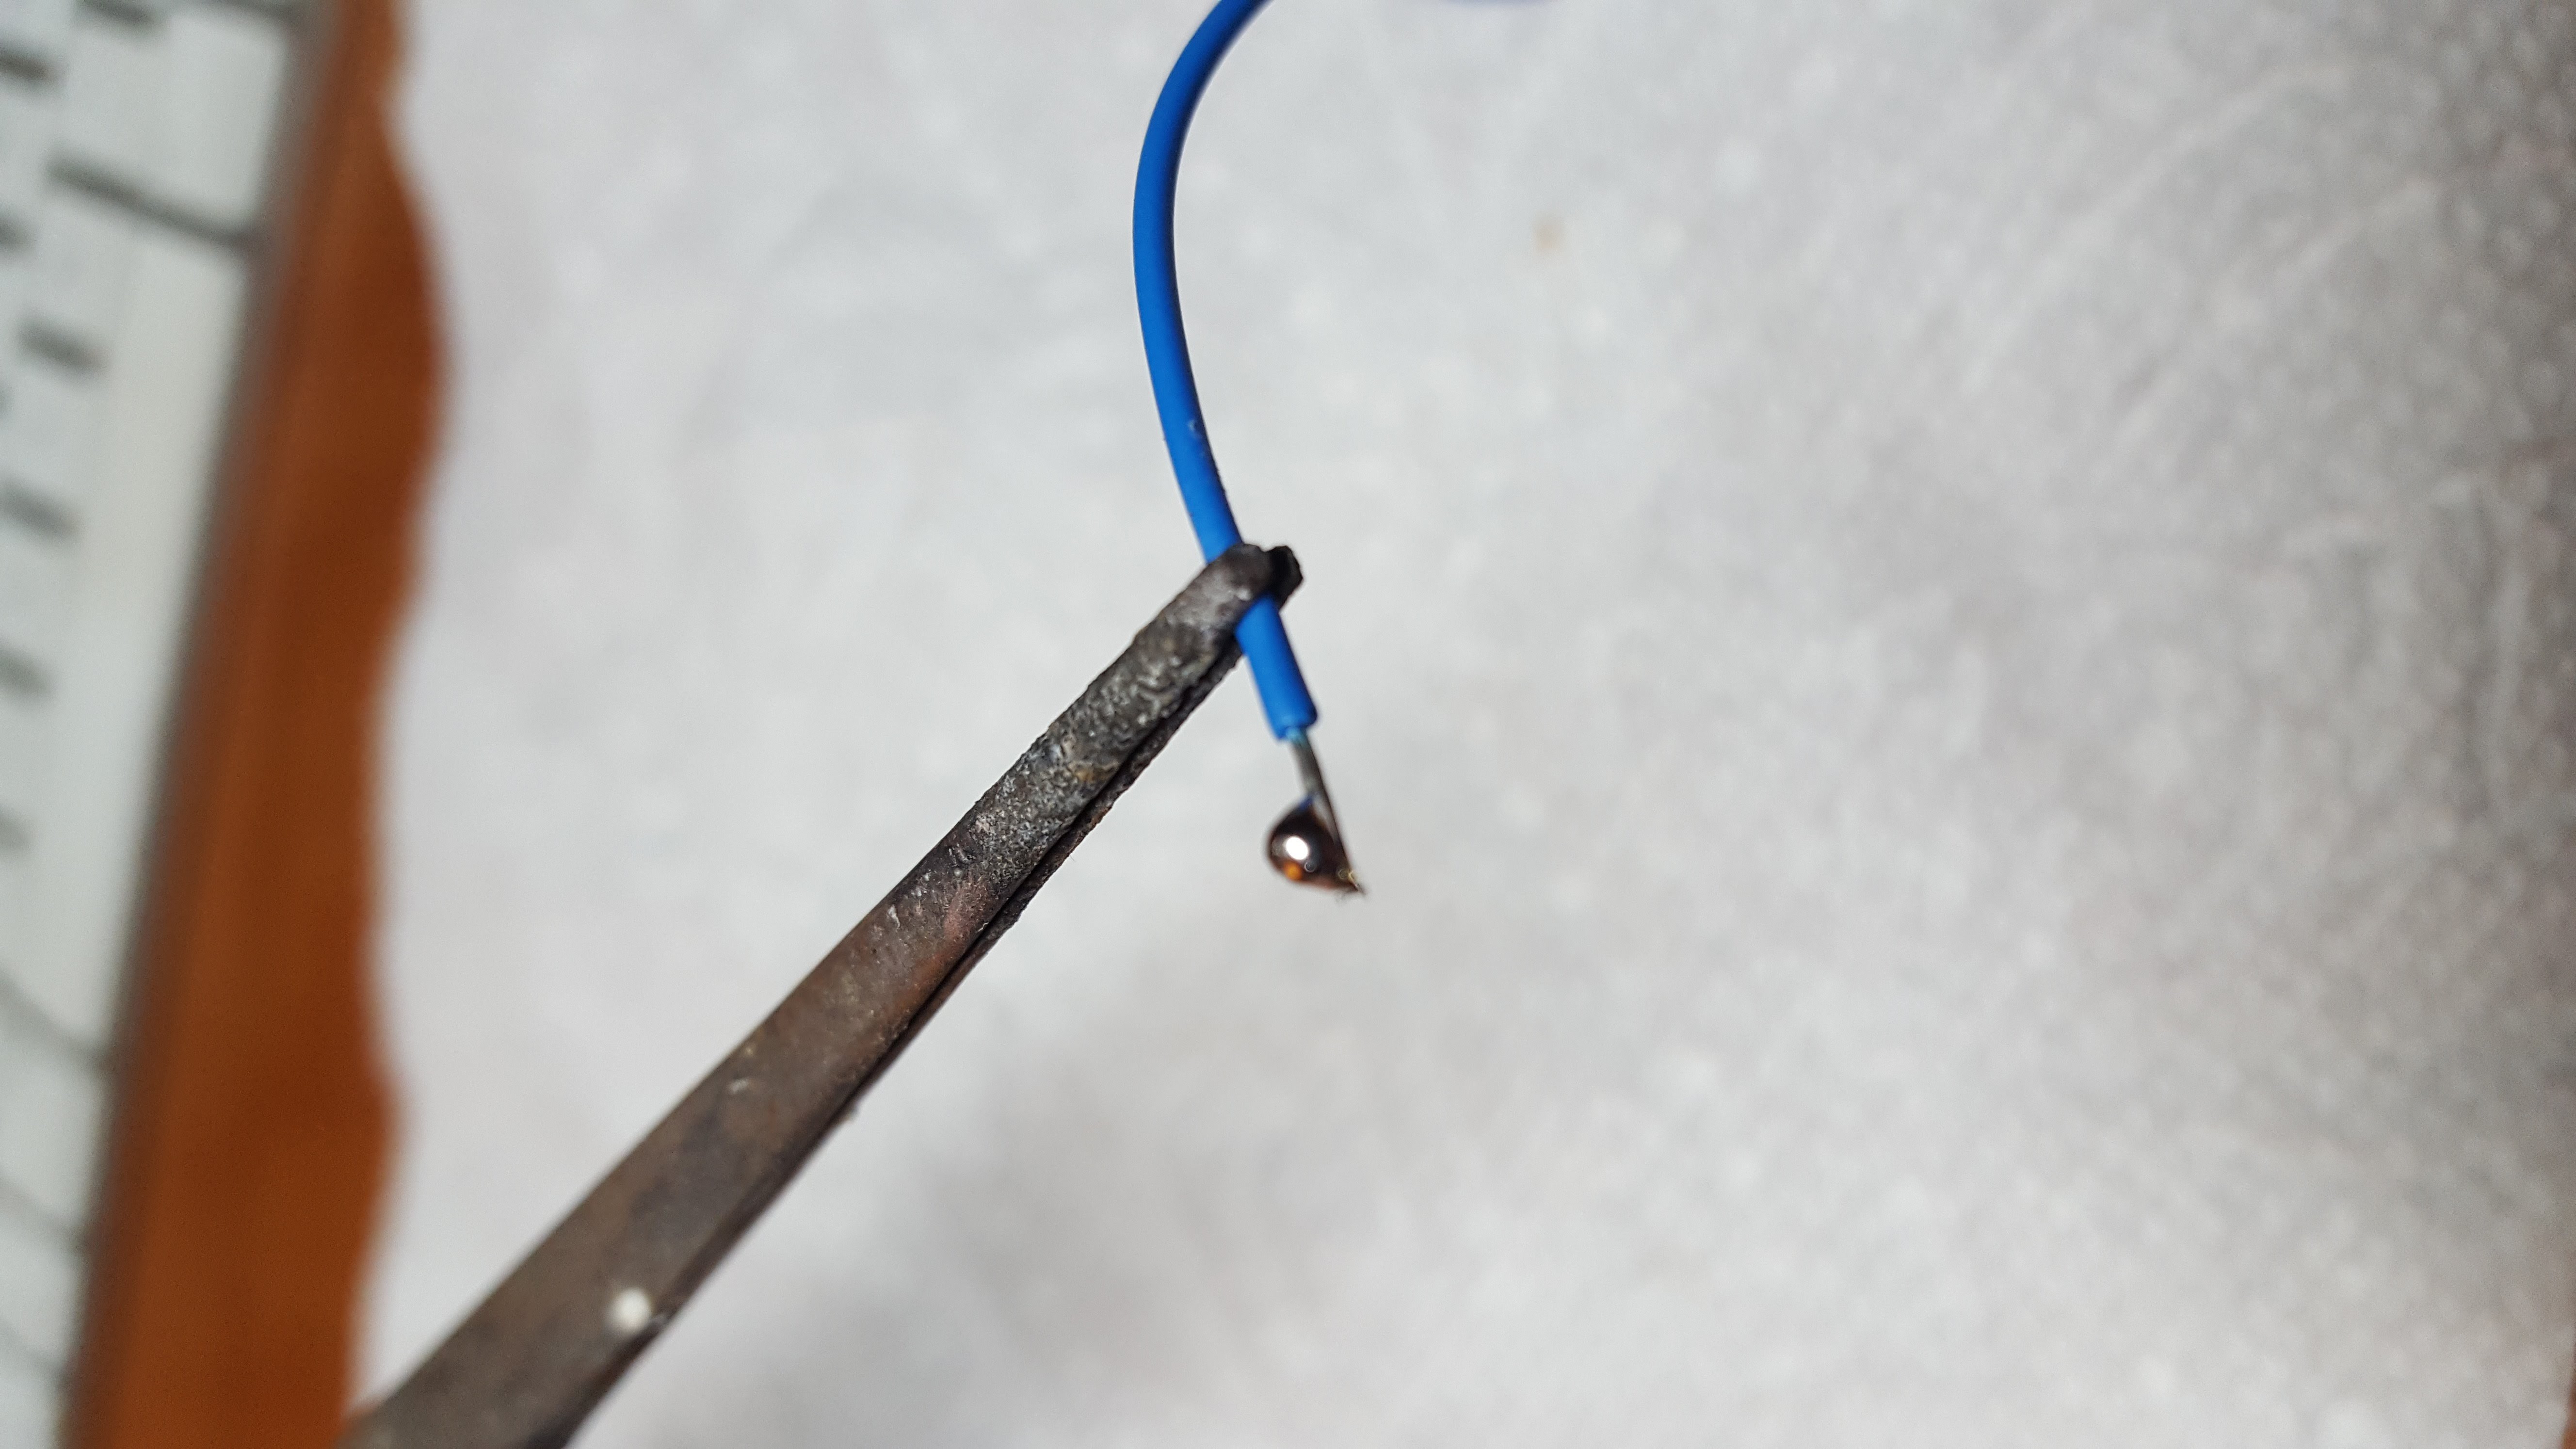 Soldering each wire individually